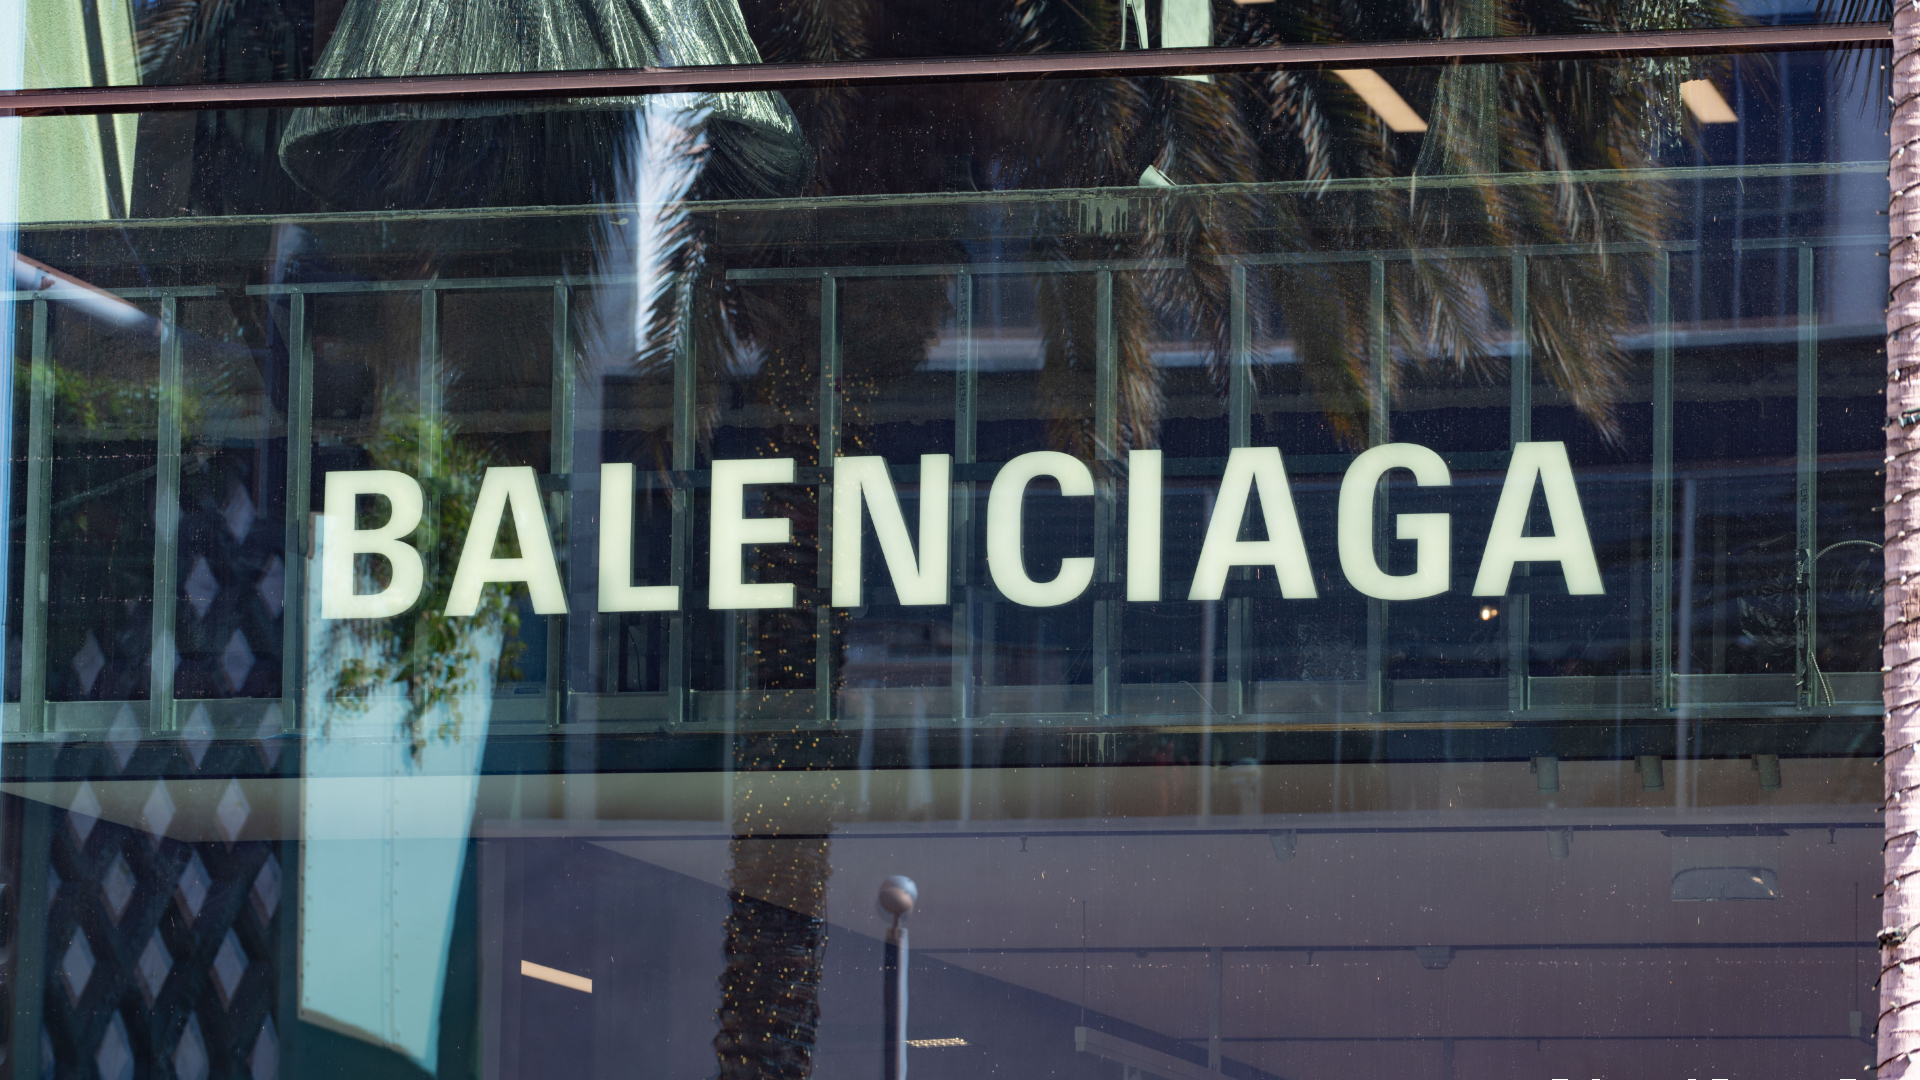 Balenciaga's $1.2K 'sagging' sweatpants get called out for appropriation